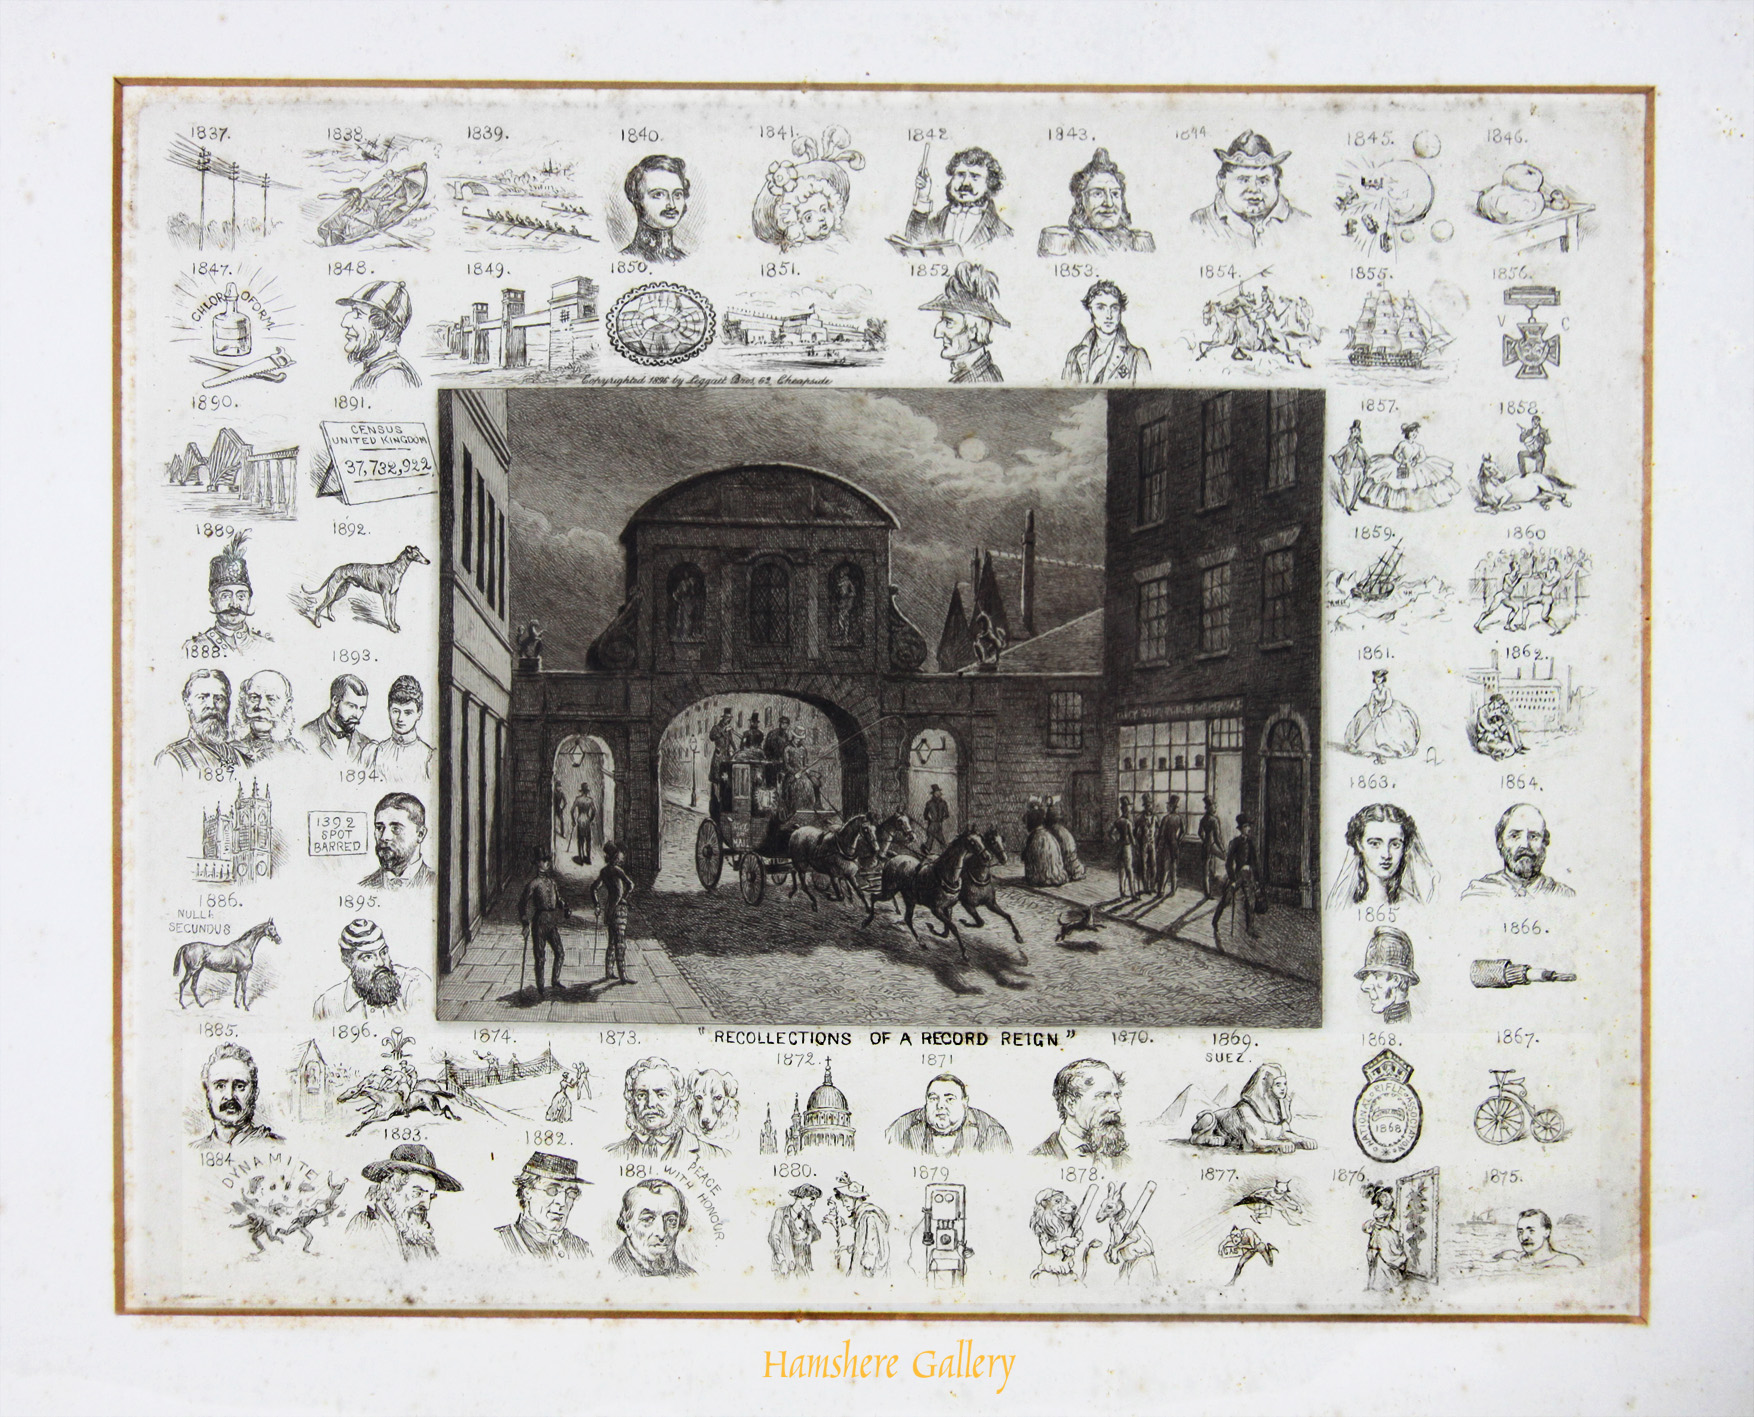 Click to see full size: �Recollections of a Record Reign� dry point etching of Poodle, English Bulldog, Scottish Terrier and Irish Terrier by Frank Paton (English, 1856-1909)- �Recollections of a Record Reign� dry point etching of Poodle, English Bulldog, Scottish Terrier and Irish Terrier by Frank Paton (English, 1856-1909)